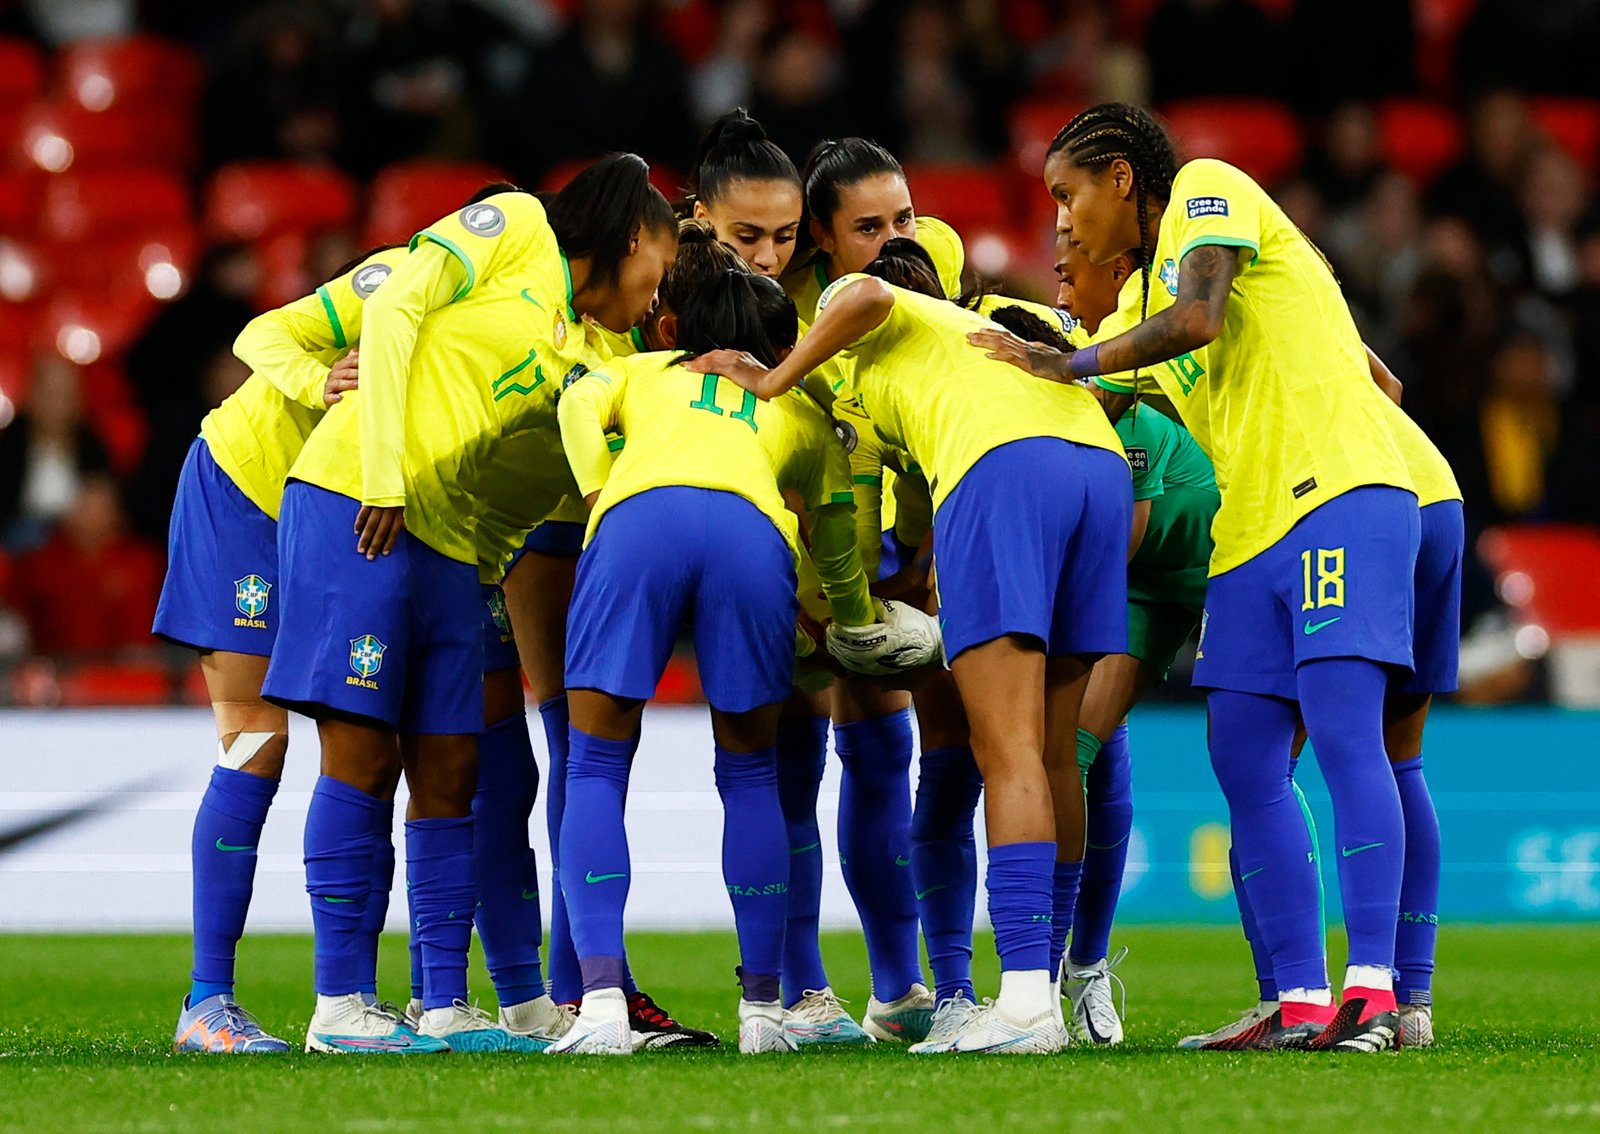 no-need-for-excuses,-brazil-changes-work-hours-for-women’s-world-cup